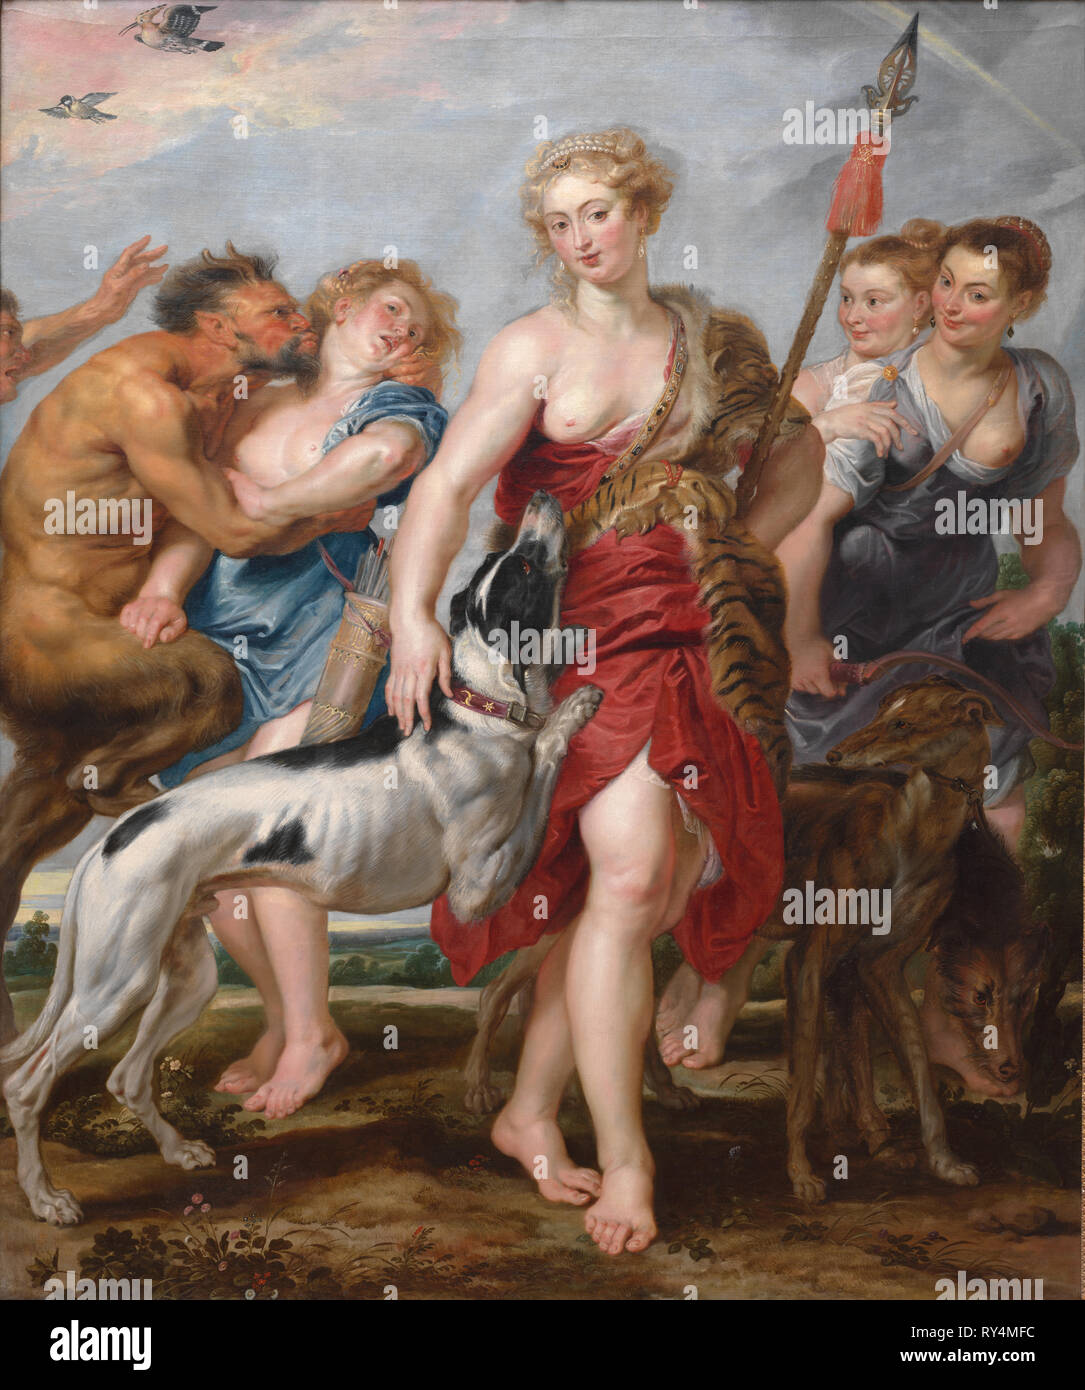 Diana and Her Nymphs Departing for the Hunt, c. 1615. And workshop Peter Paul Rubens (Flemish, 1577-1640). Oil on canvas; framed: 261 x 225 x 11 cm (102 3/4 x 88 9/16 x 4 5/16 in.); unframed: 216 x 178.7 cm (85 1/16 x 70 3/8 in Stock Photo